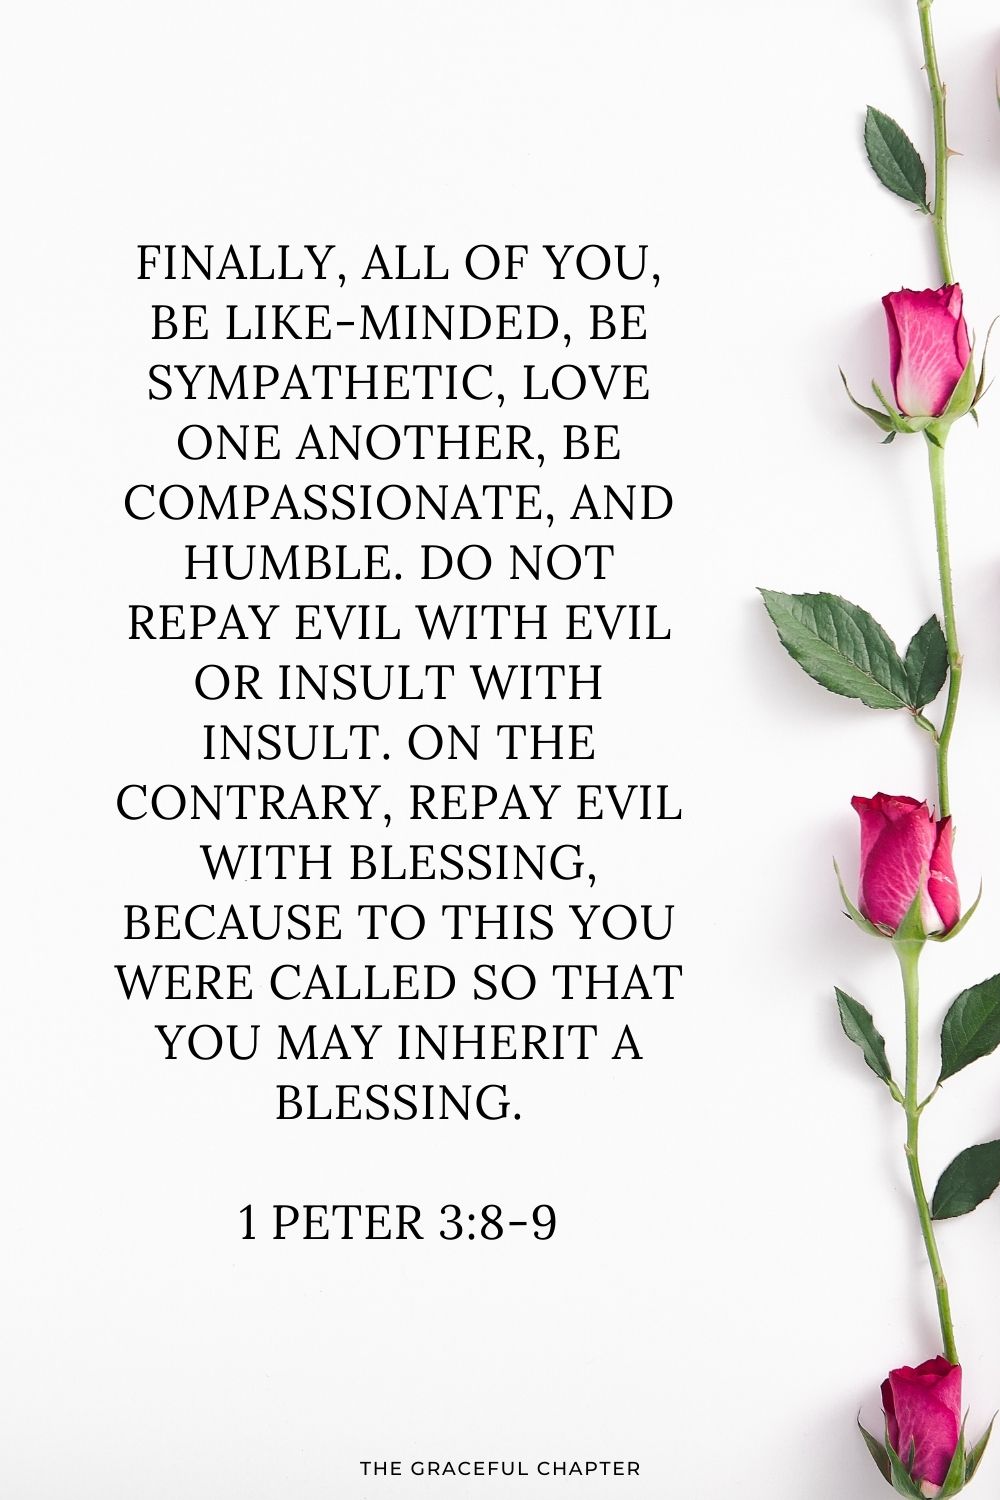 Finally, all of you, be like-minded, be sympathetic, love one another, be compassionate and humble. Do not repay evil with evil or insult with insult. On the contrary, repay evil with blessing, because to this you were called so that you may inherit a blessing. 1 Peter 3:8-9